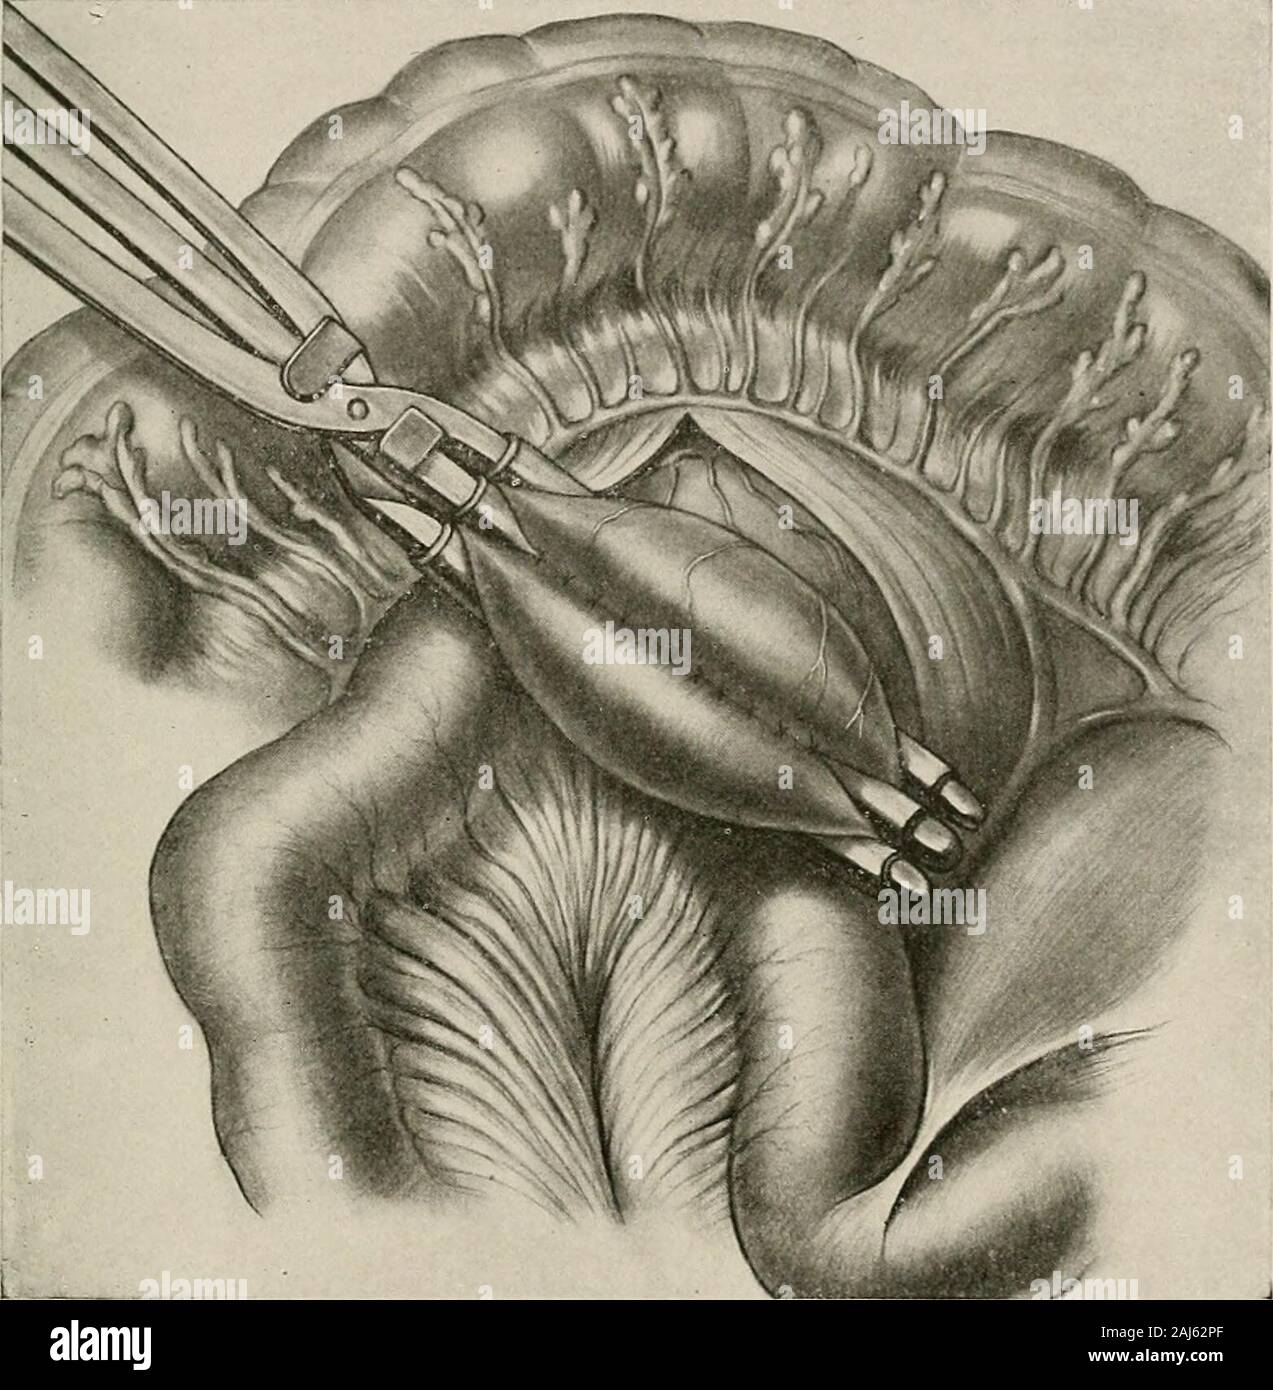 Surgical treatment; a practical treatise on the therapy of surgical diseases for the use of practitioners and students of surgery . through the transverse mescolon. The incision shouldbegin about 5 cm. (2 inches) below the ensiform cartilage and extend belowthe level of the umbilicus. The abdomen is opened about 2 cm. (% inch)to the right of the median line, by retracting outward the rectus muscle. The THE ABDOMEN 763 stomach is lifted forward with the transverse colon and the great omentum,and turned upward over the upper end of the abdominal opening. Theomentum is pressed upward and the lowe Stock Photo